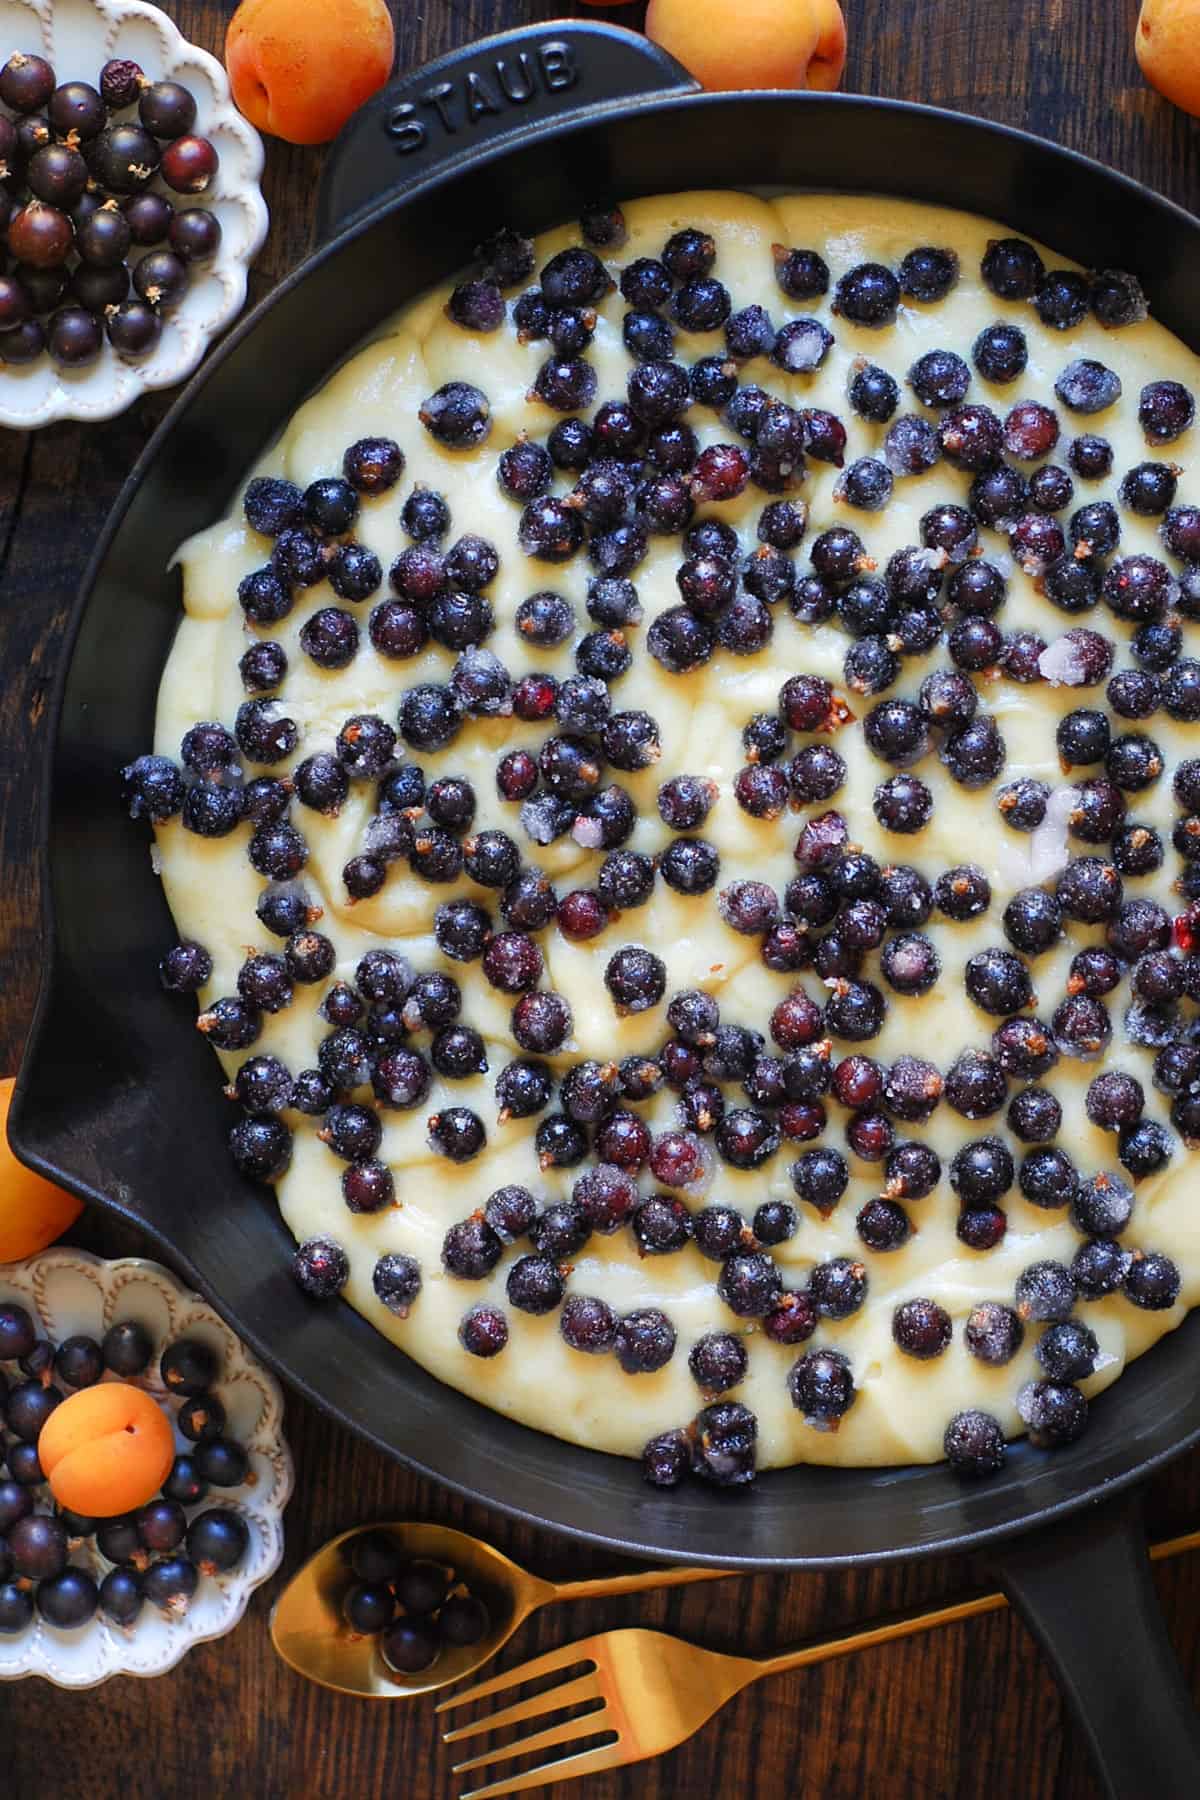 cake batter with fresh black currants on top in a cast iron skillet.